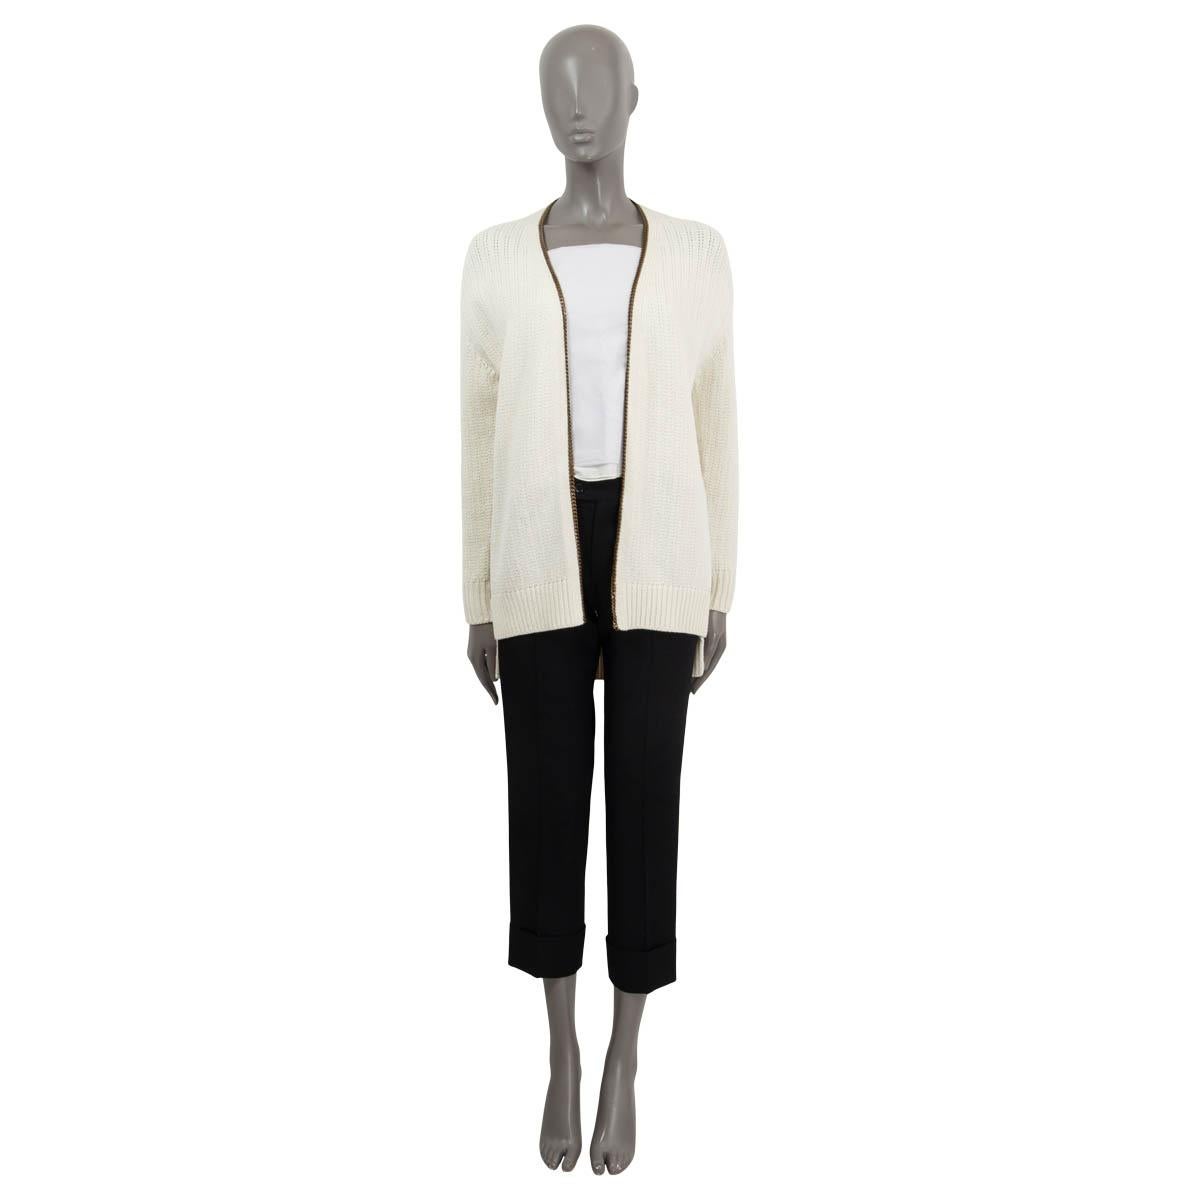 100% authentic Saint Laurent 2019 open college cardigan in off-white wool (45%), viscose (45%) and nylon (10%). Features long sleeves and a chain trim. Has been worn and is in excellent condition.

Measurements
Tag Size	S
Size	S
Shoulder Width	49cm